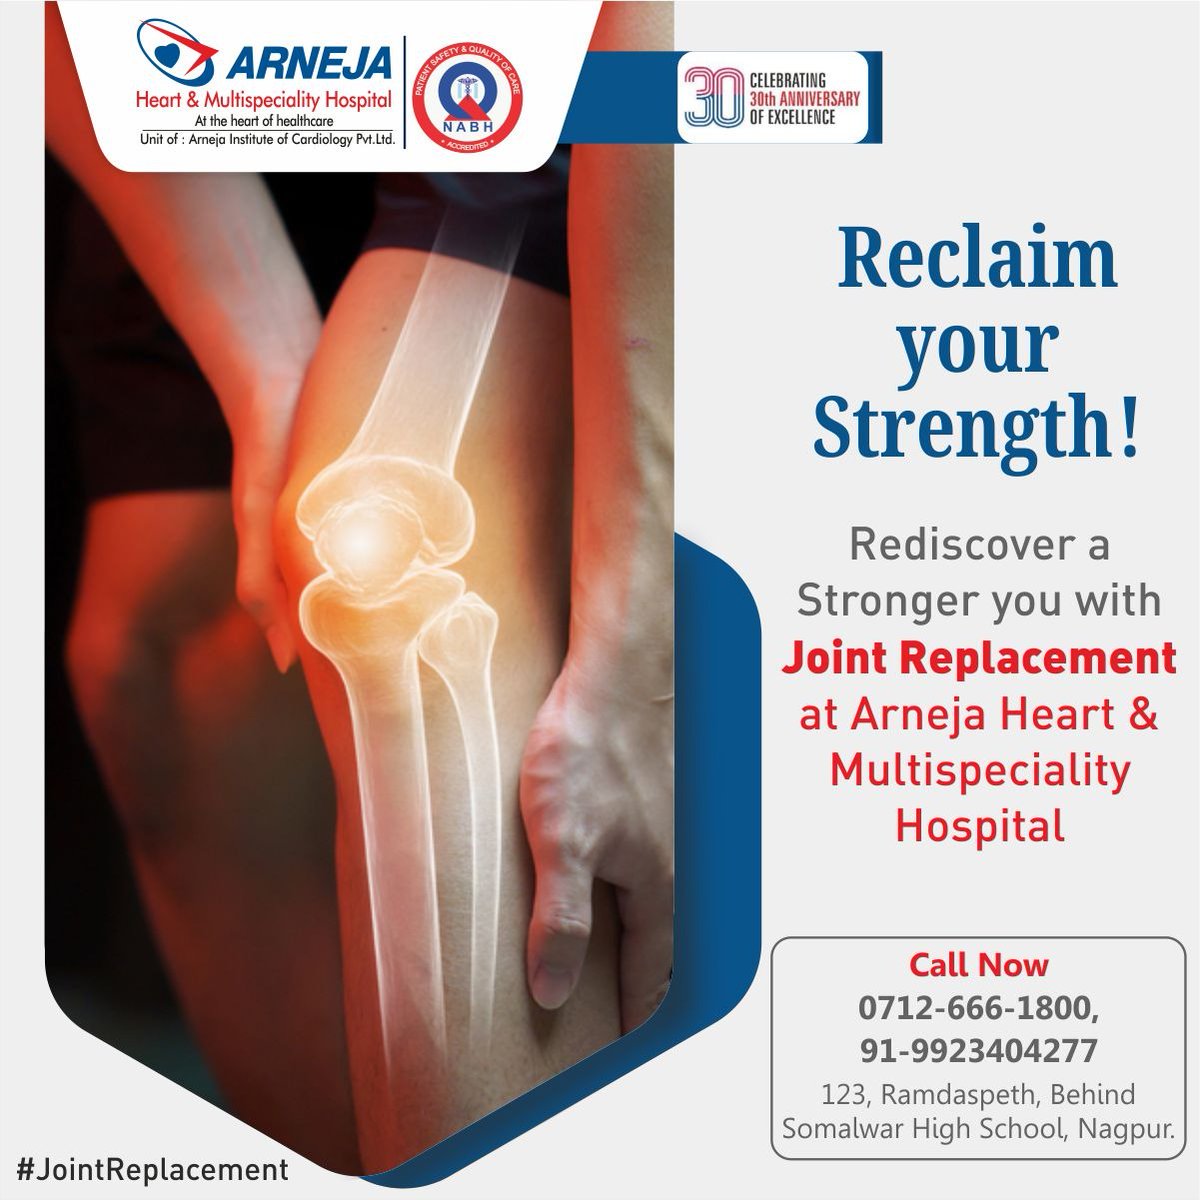 𝐑𝐞𝐜𝐥𝐚𝐢𝐦
𝐲𝐨𝐮𝐫
𝐒𝐭𝐫𝐞𝐧𝐠𝐭𝐡!

Rediscover a Stronger you with Joint Replacement at 𝐀𝐫𝐧𝐞𝐣𝐚 𝐇𝐞𝐚𝐫𝐭 & 𝐌𝐮𝐥𝐭𝐢𝐬𝐩𝐞𝐜𝐢𝐚𝐥𝐢𝐭𝐲 𝐇𝐨𝐬𝐩𝐢𝐭𝐚𝐥! 

✅𝐖𝐞𝐛𝐬𝐢𝐭𝐞:- arnejaheartinstitute.com

#JointReplacement #PainFreeLiving #OrthopedicCare #HealthyJoints